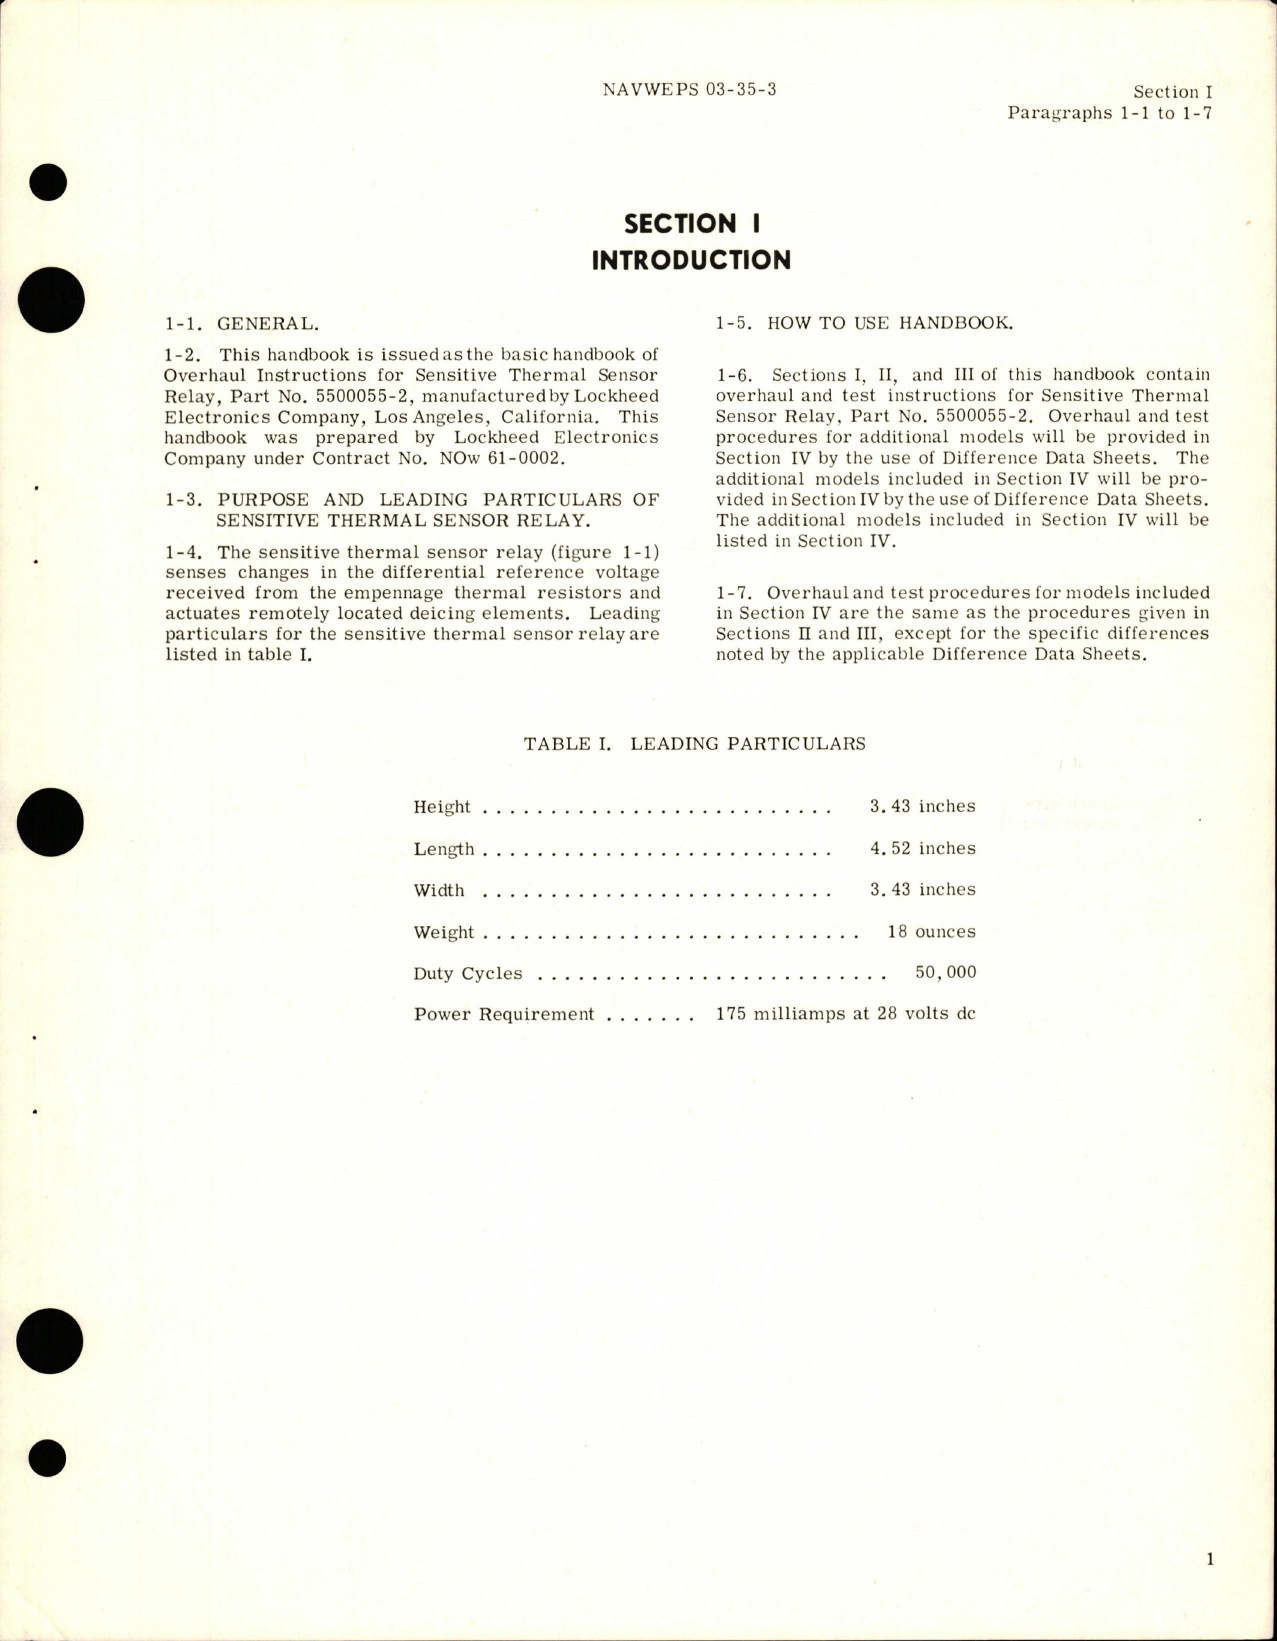 Sample page 5 from AirCorps Library document: Overhaul Instructions for Sensitive Thermal Sensor Relay - Part 5500055-2